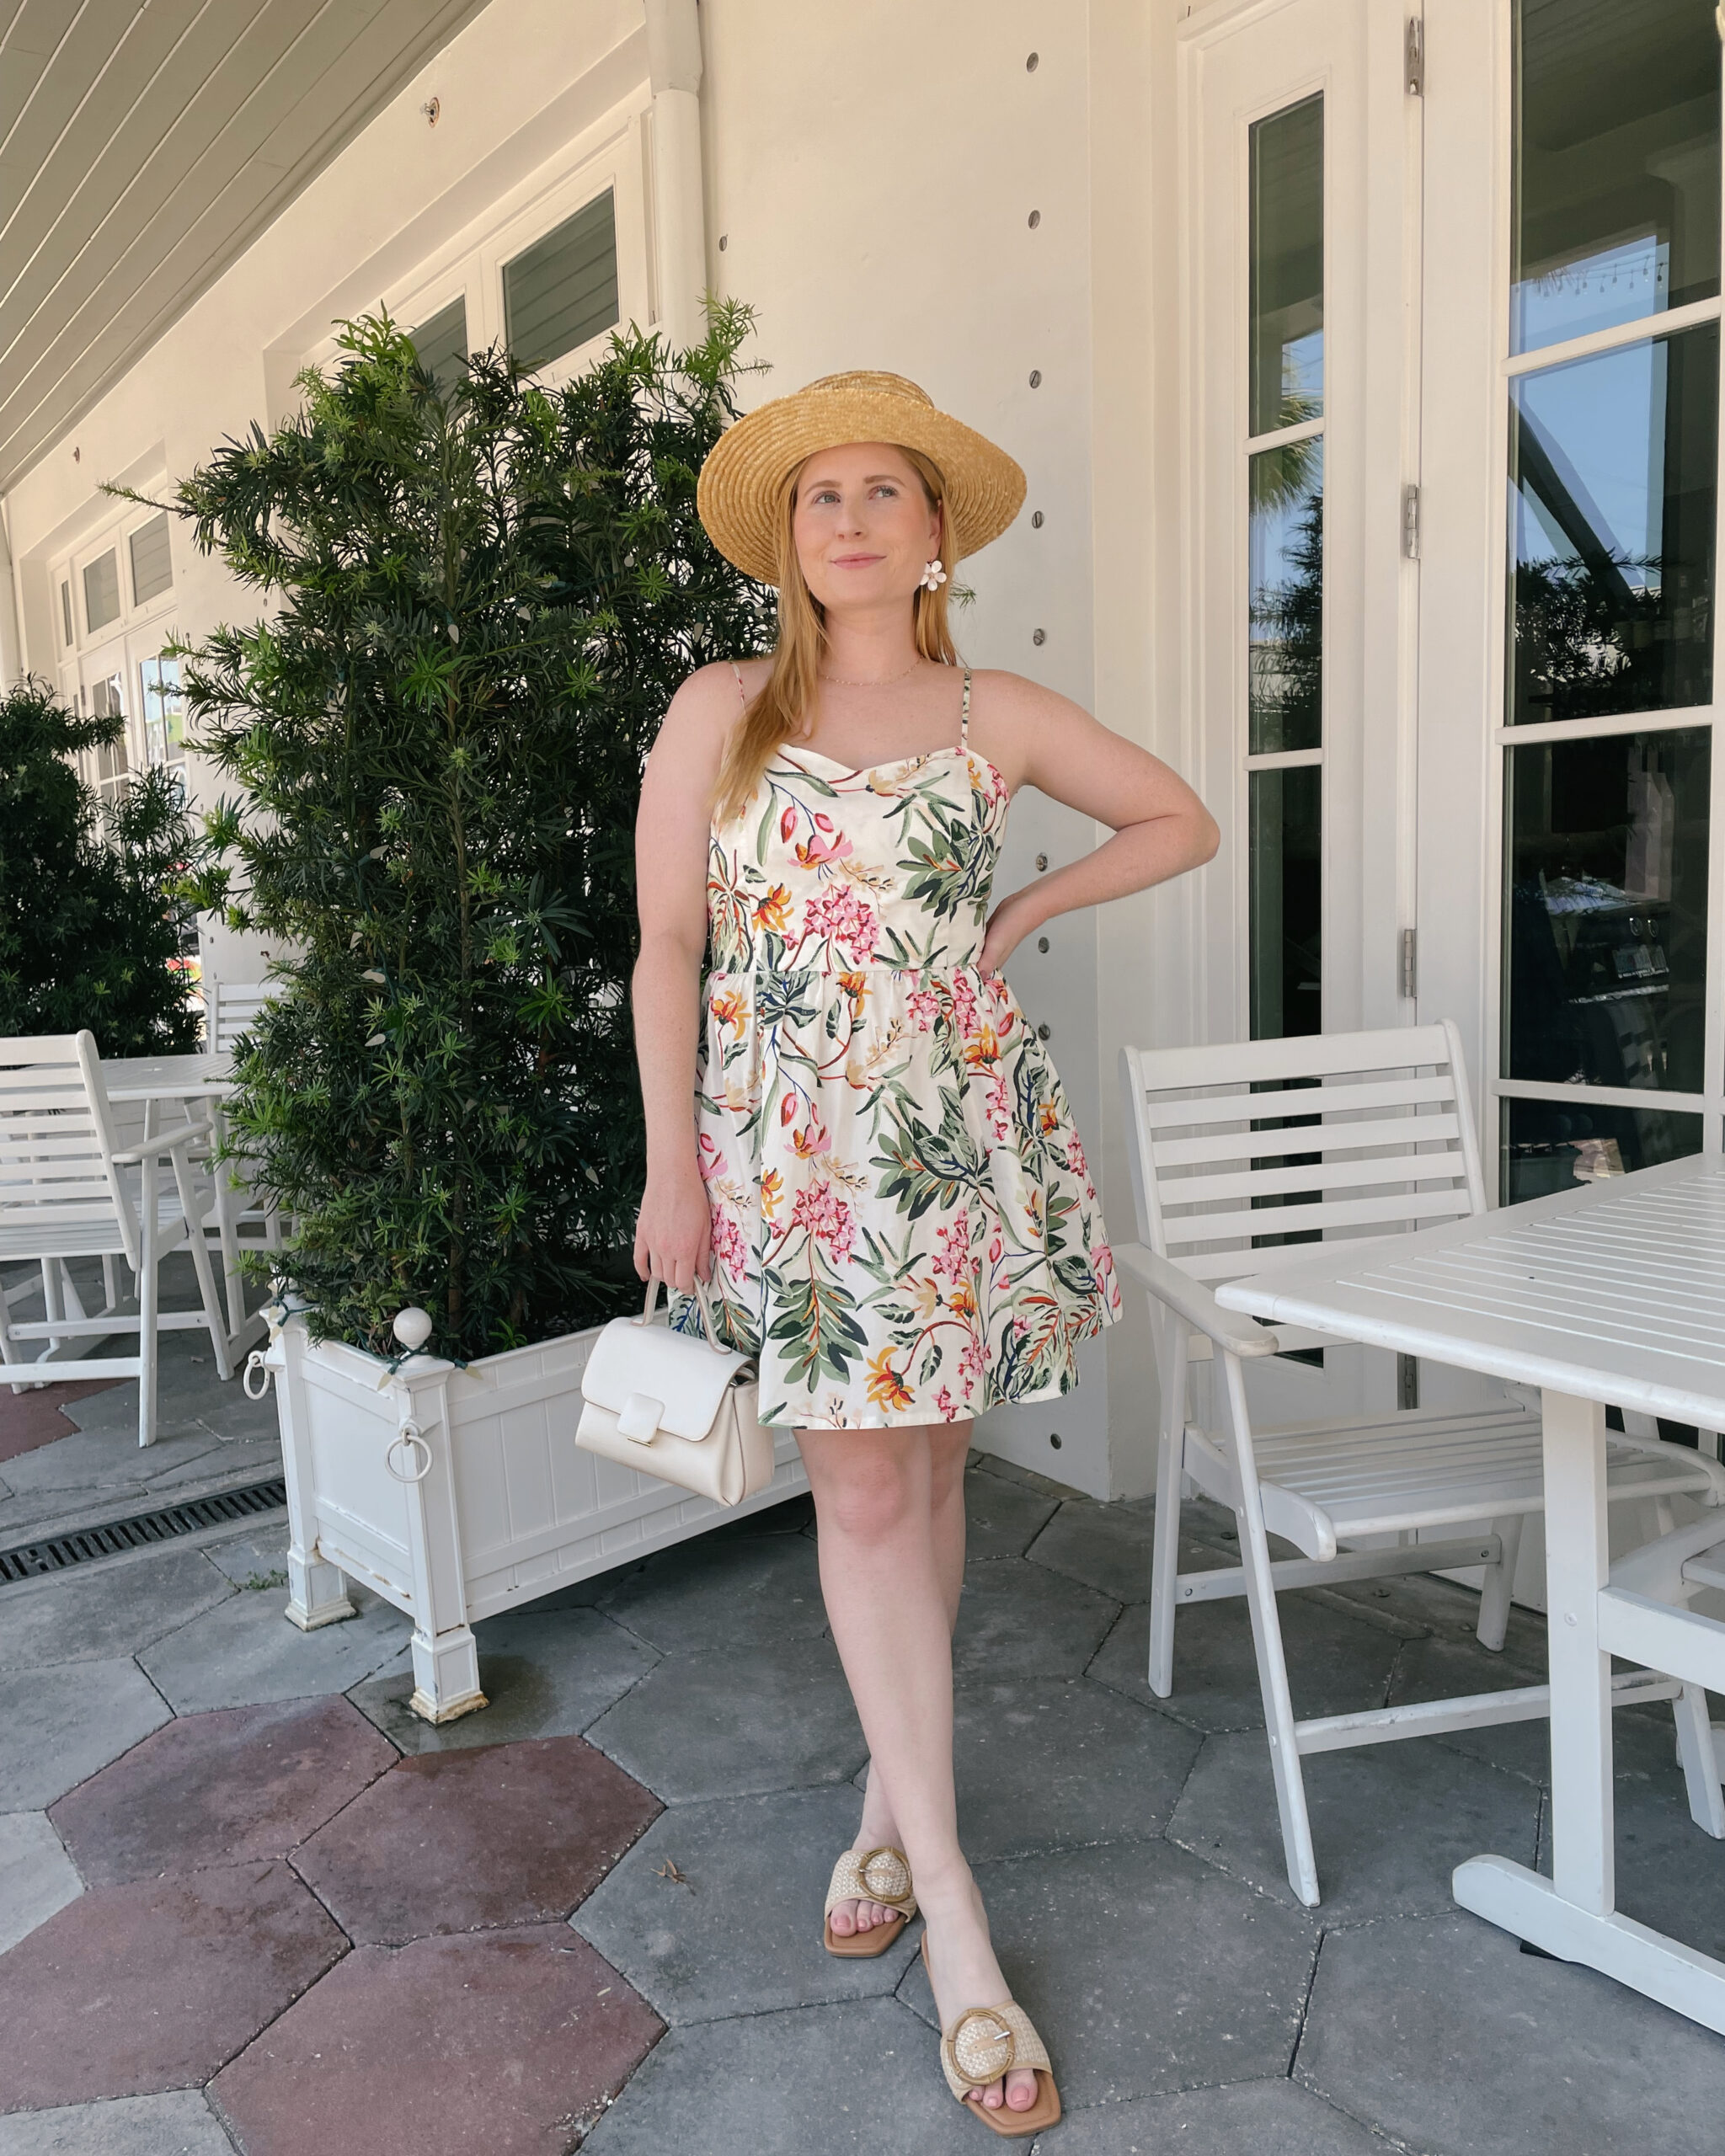 H&M Summer Clothes | Perfect Summer Dresses at H&M | The Summer Collection at H&M 2024 | Affordable by Amanda, Florida Style Blogger